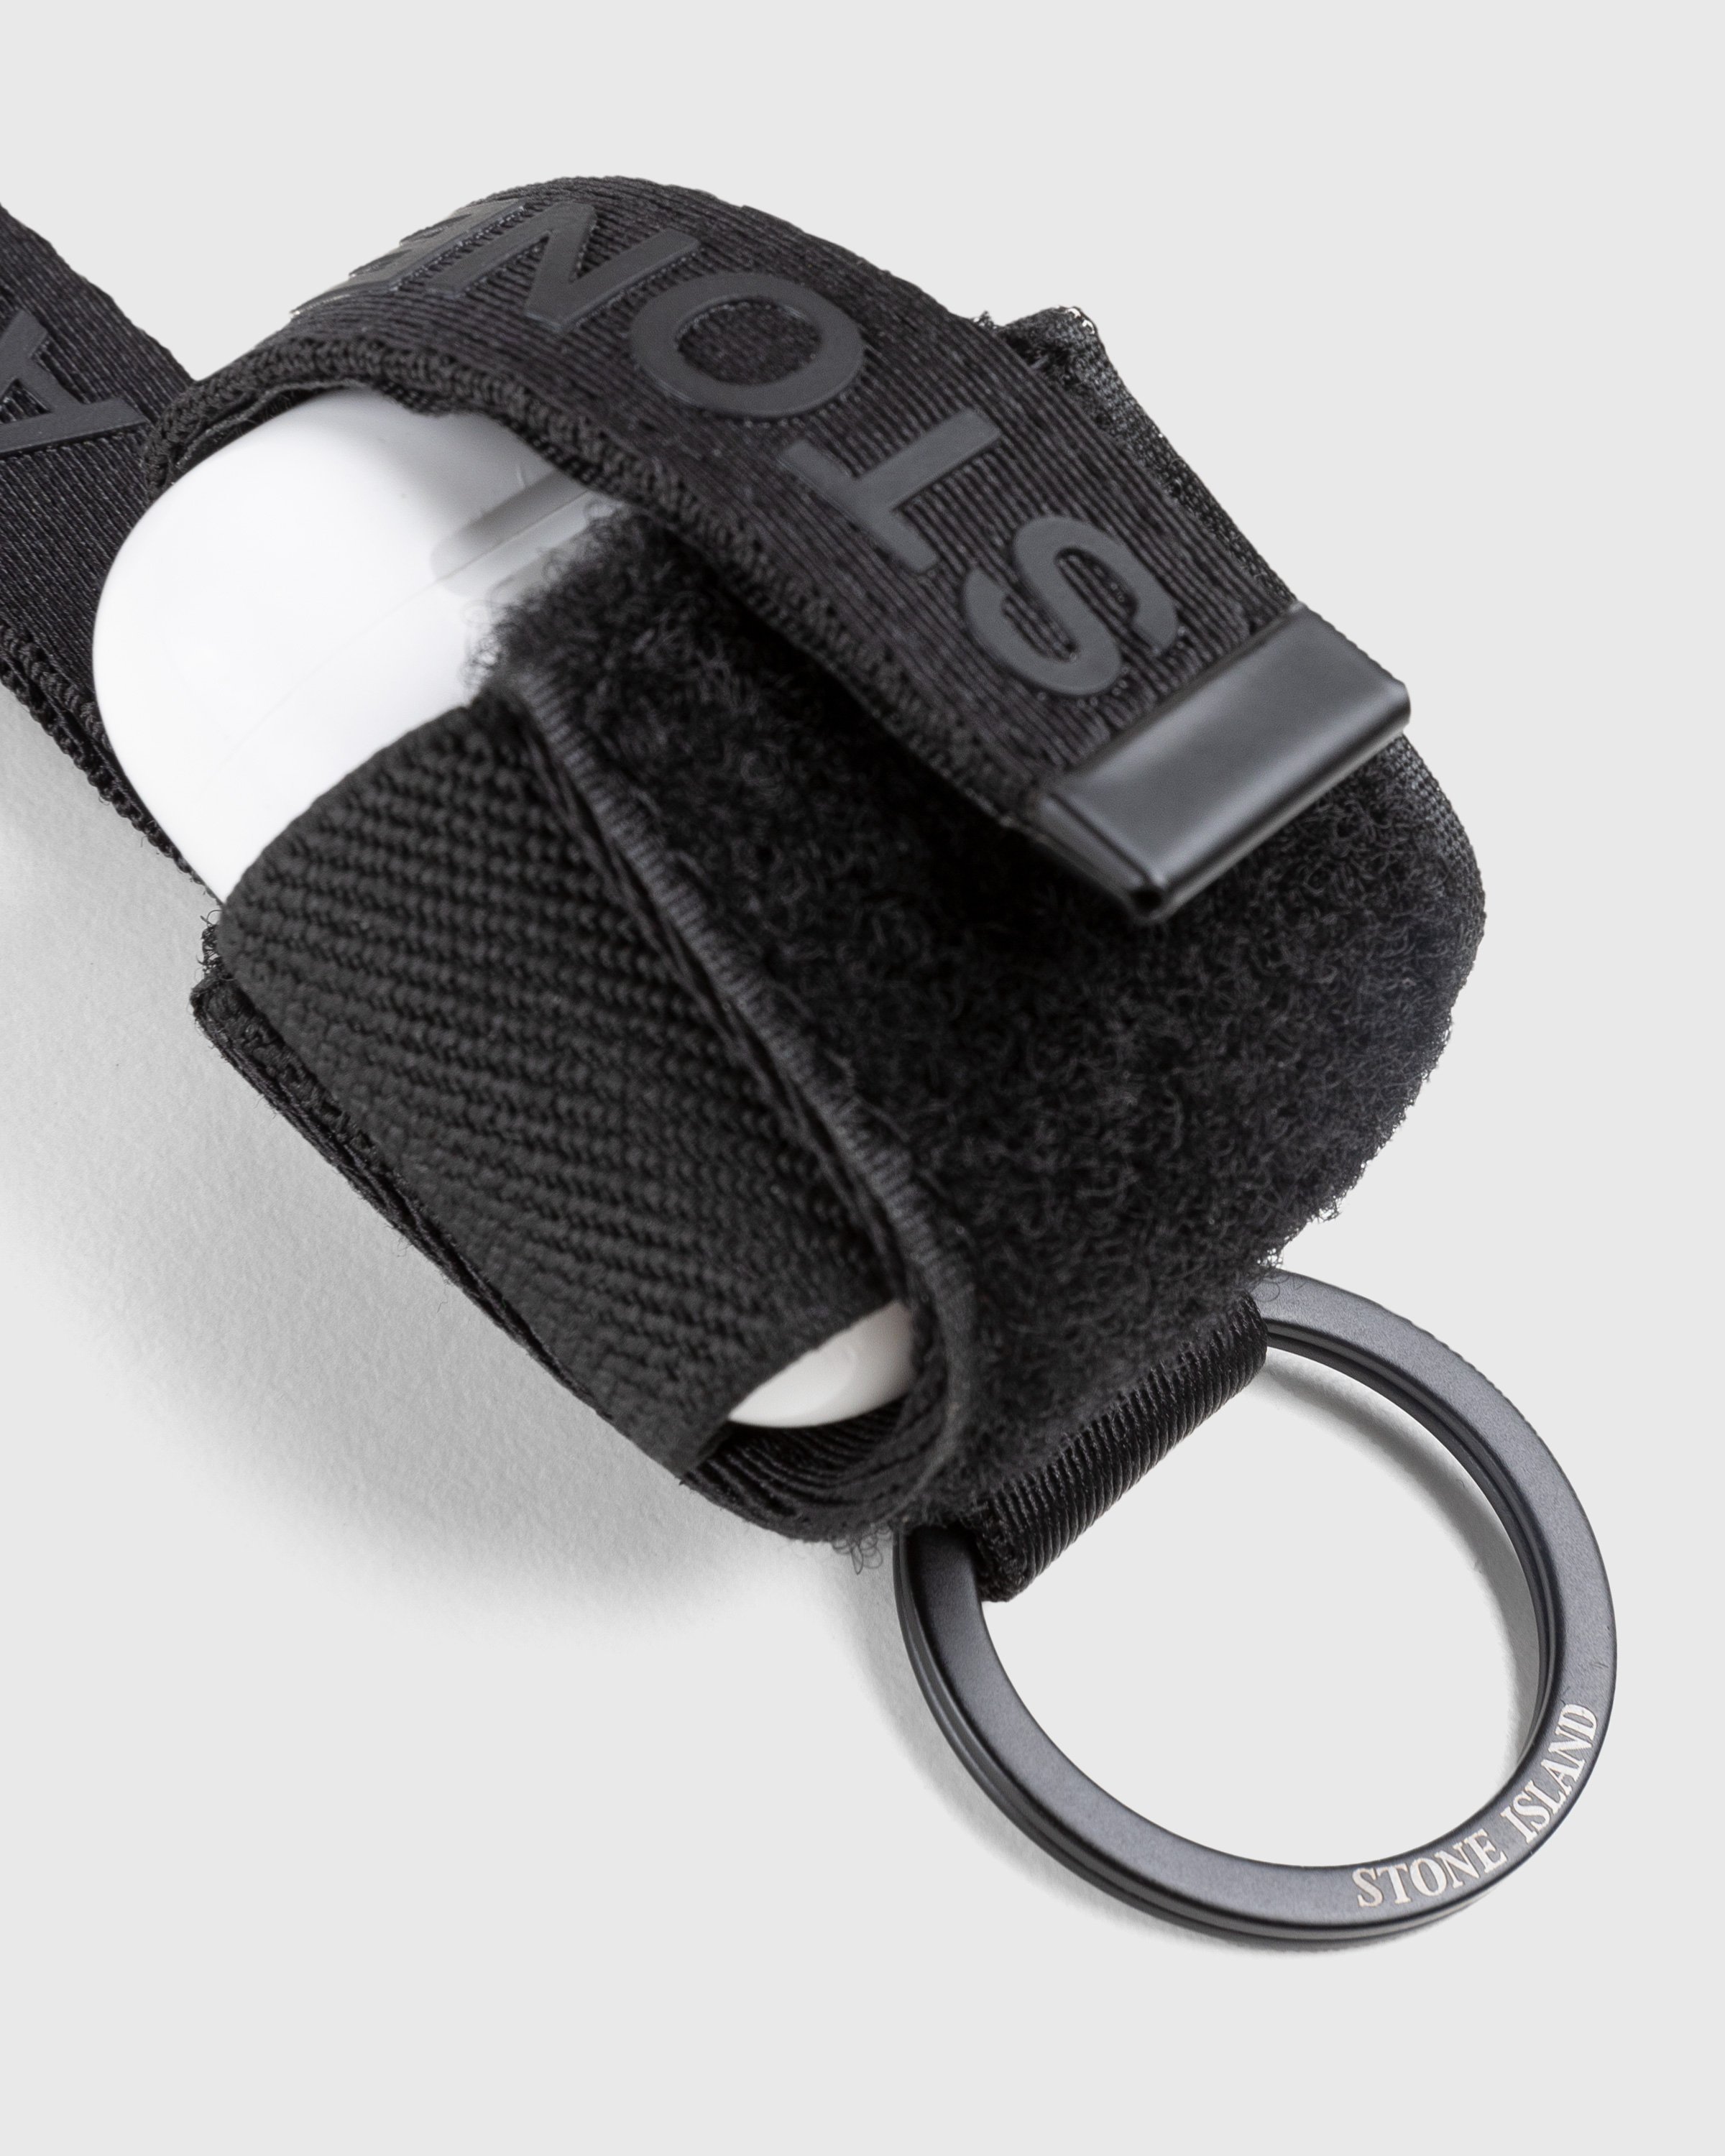 Stone Island - AirPods Case With Key Holder Black - Accessories - Black - Image 3